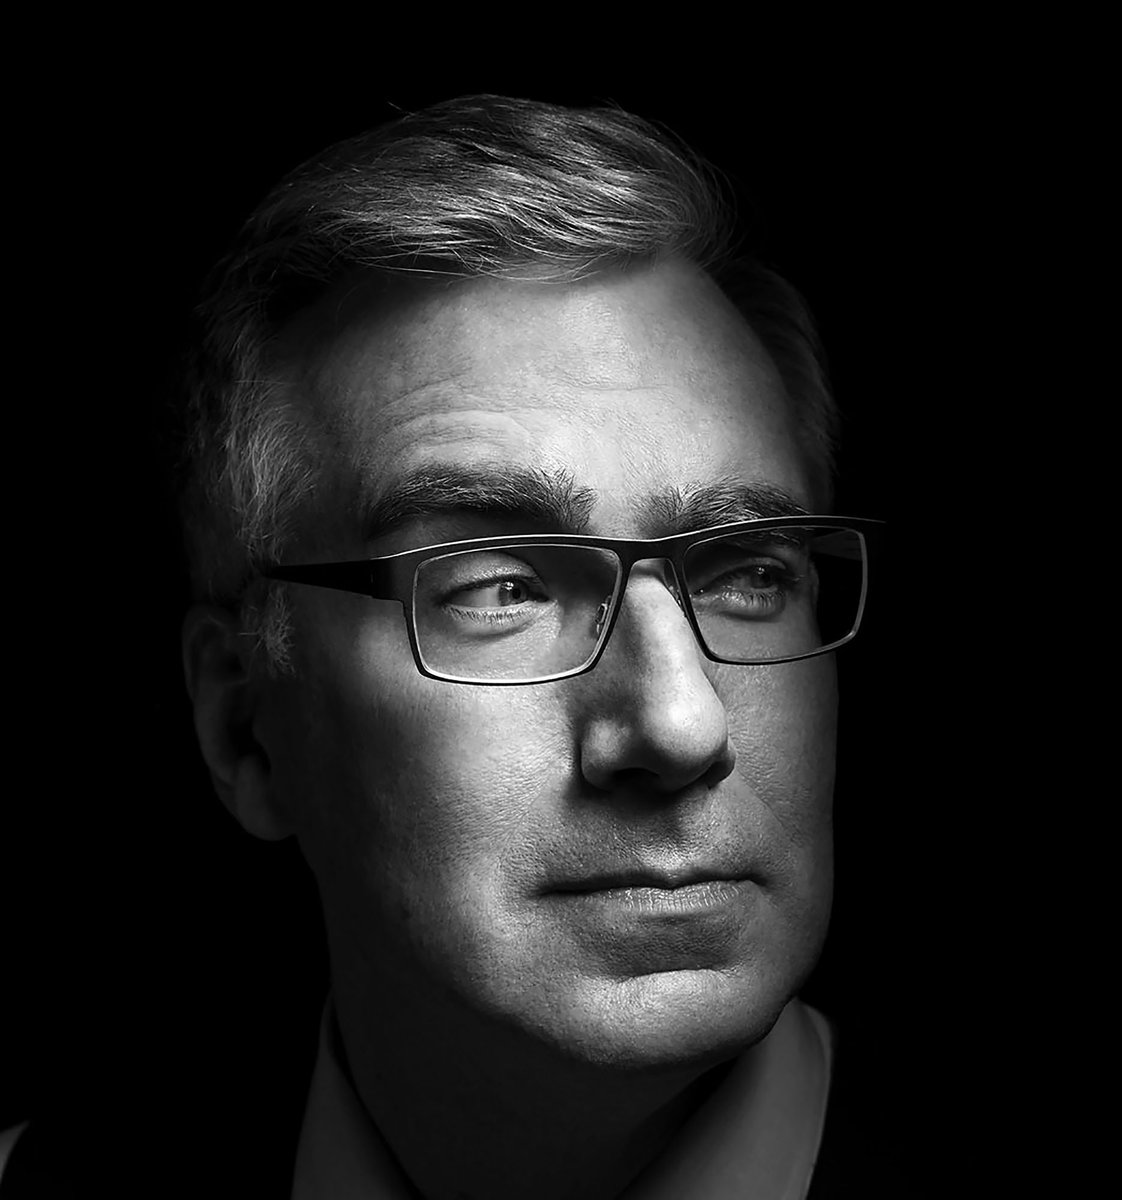 Keith Theodore Olbermann. (GQ, The Resistance With Keith Olbermann, ESPN)18 U.S. Code § 2384 - Seditious Conspiracy18 U.S. Code § 1962 - R.I.C.O.